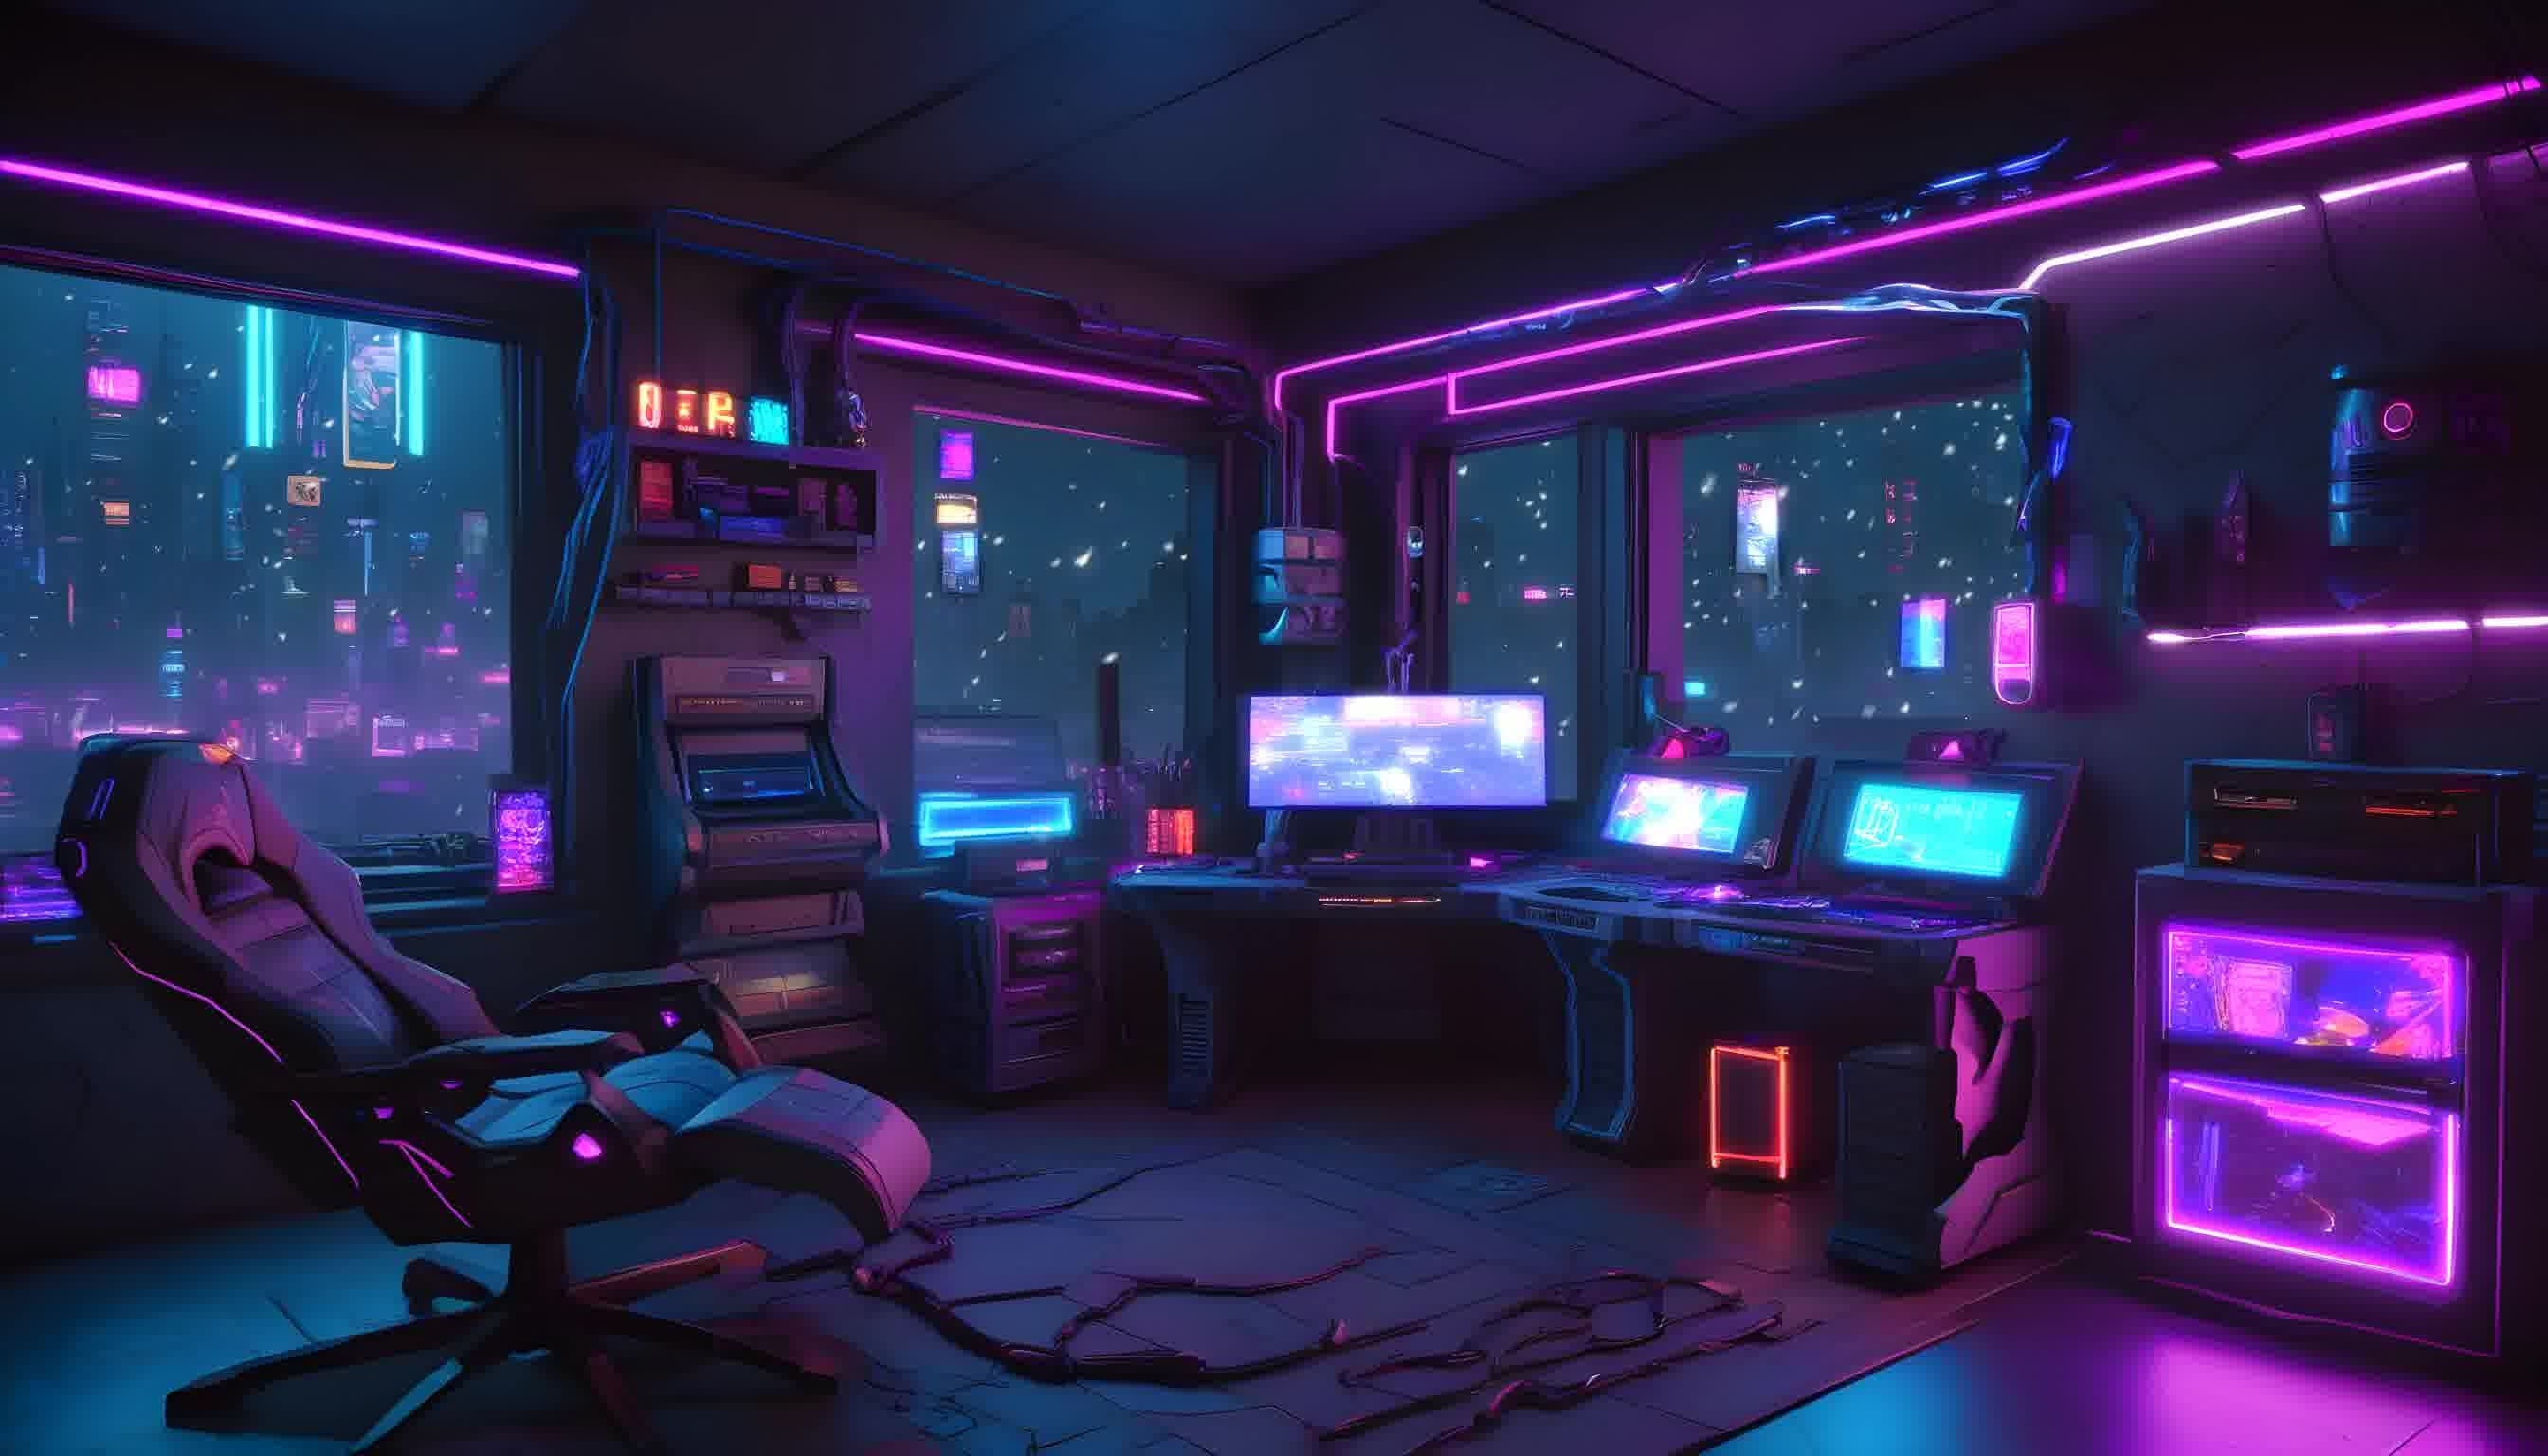 Virtual Cyberpunk Bedroom: Neon Ambiance & Skyline View Perfect for ...